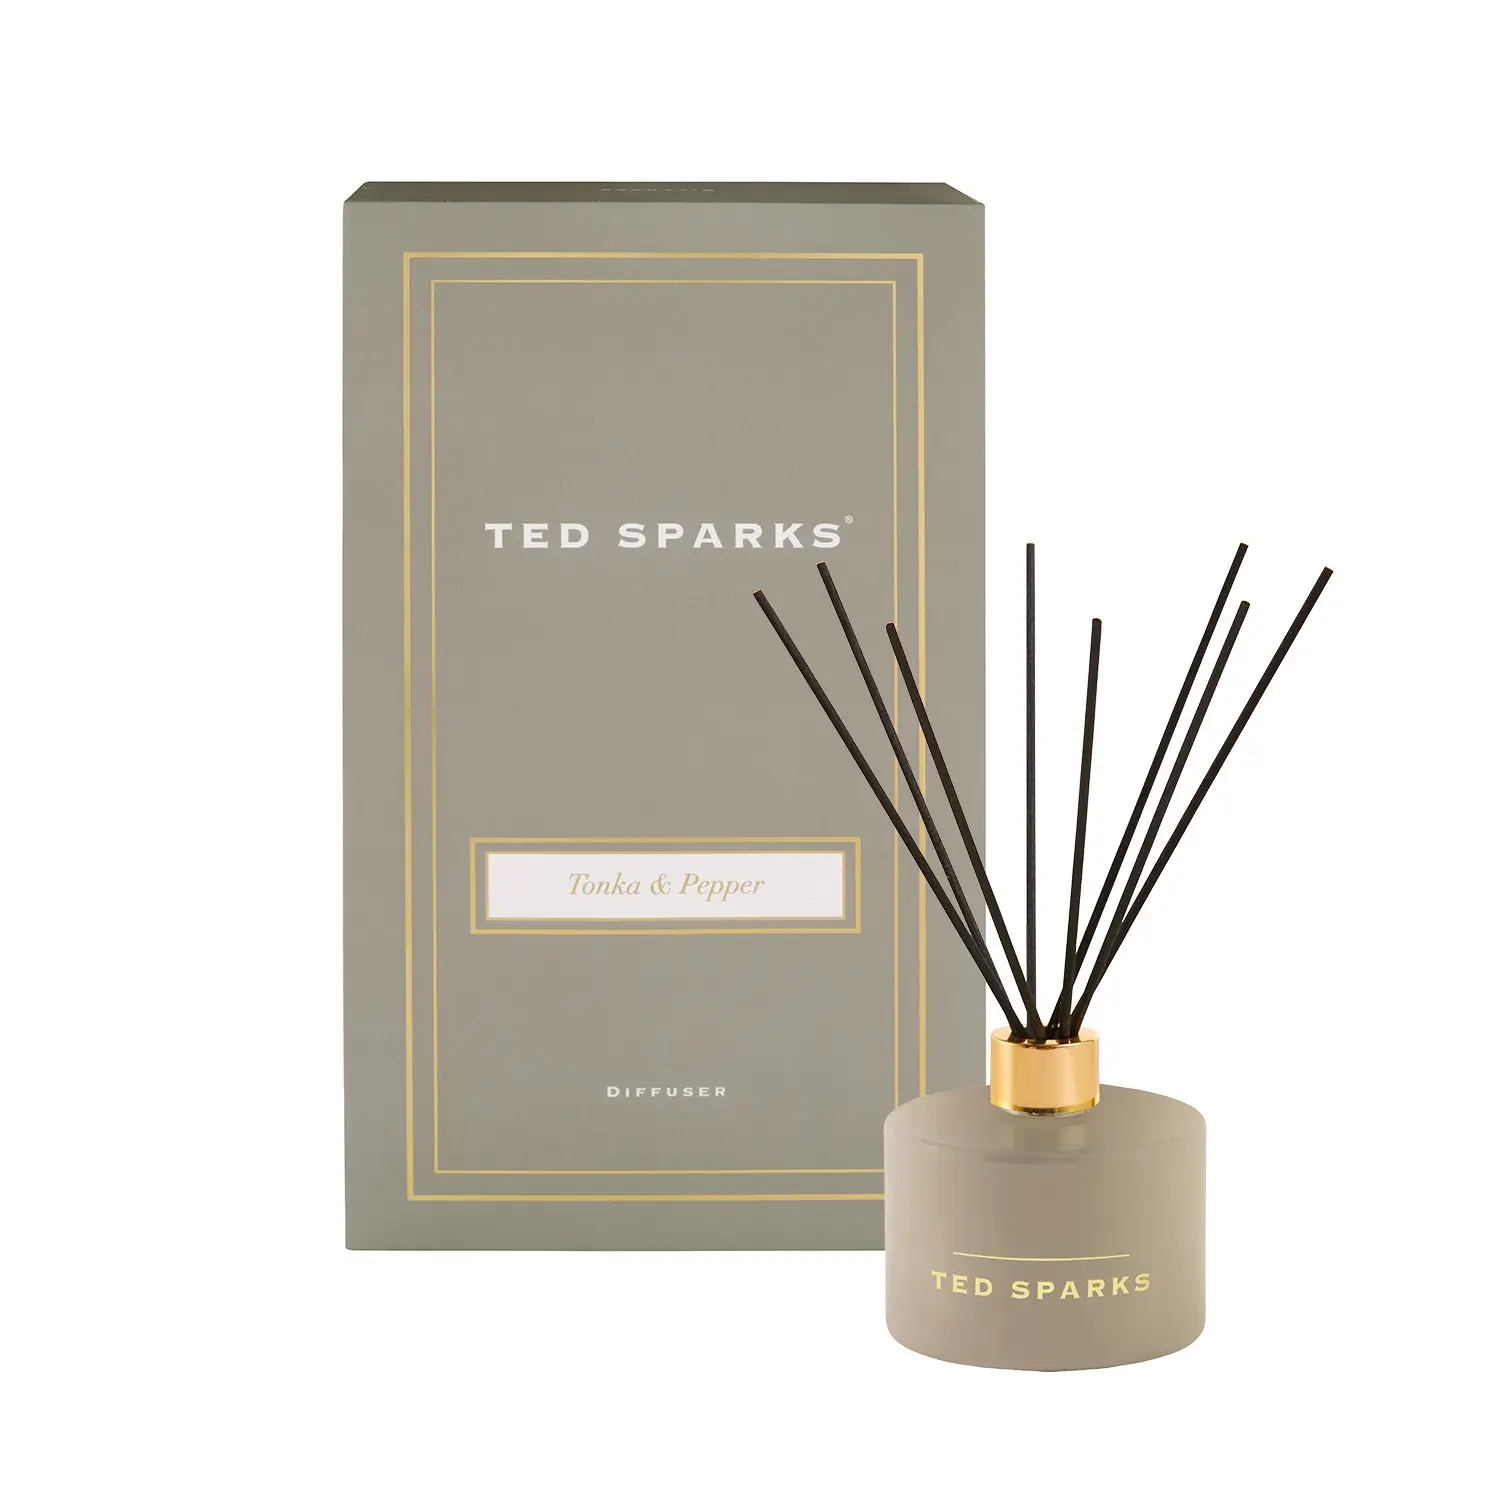 Ted Sparks - Duftst盲bchen Diffuser 